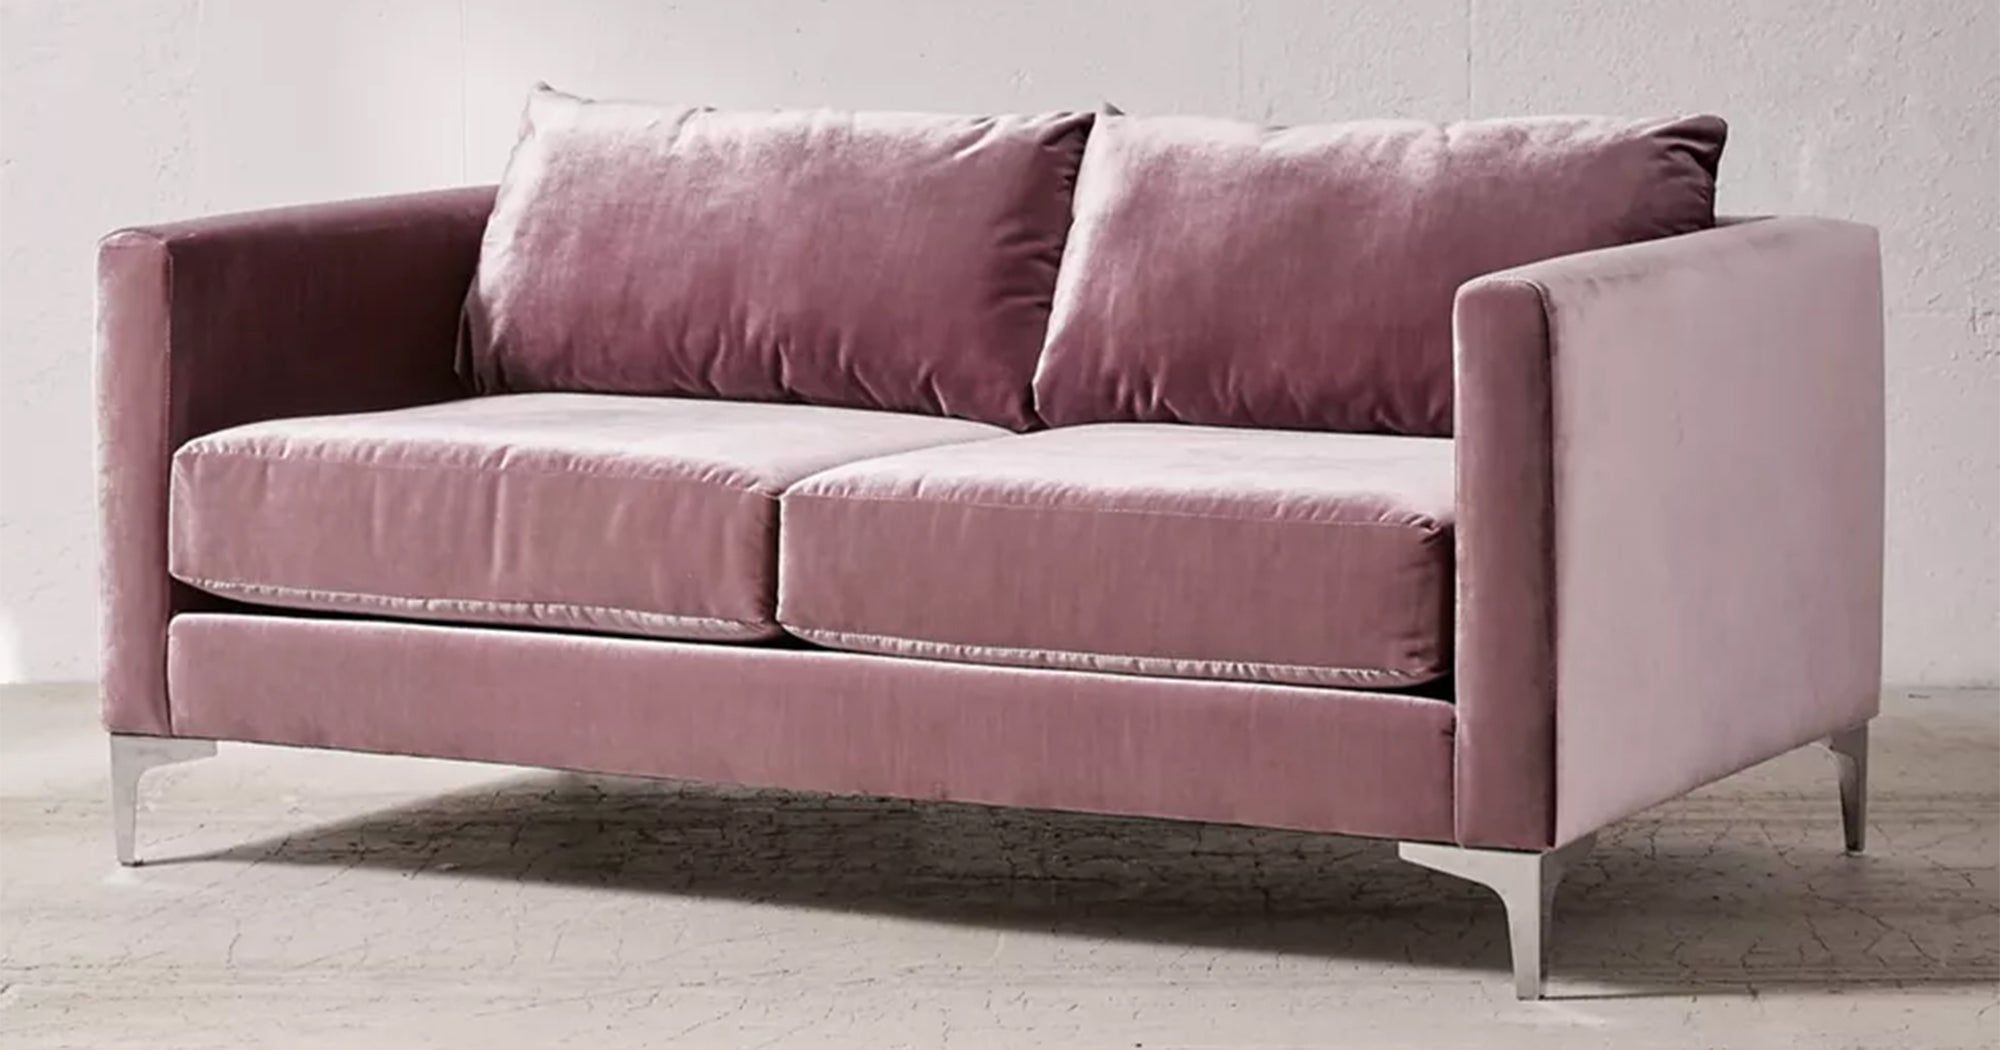 Best Small Loveseats For Affordable & Space Saving Sofa With Small Love Seats In Velvet (View 17 of 21)